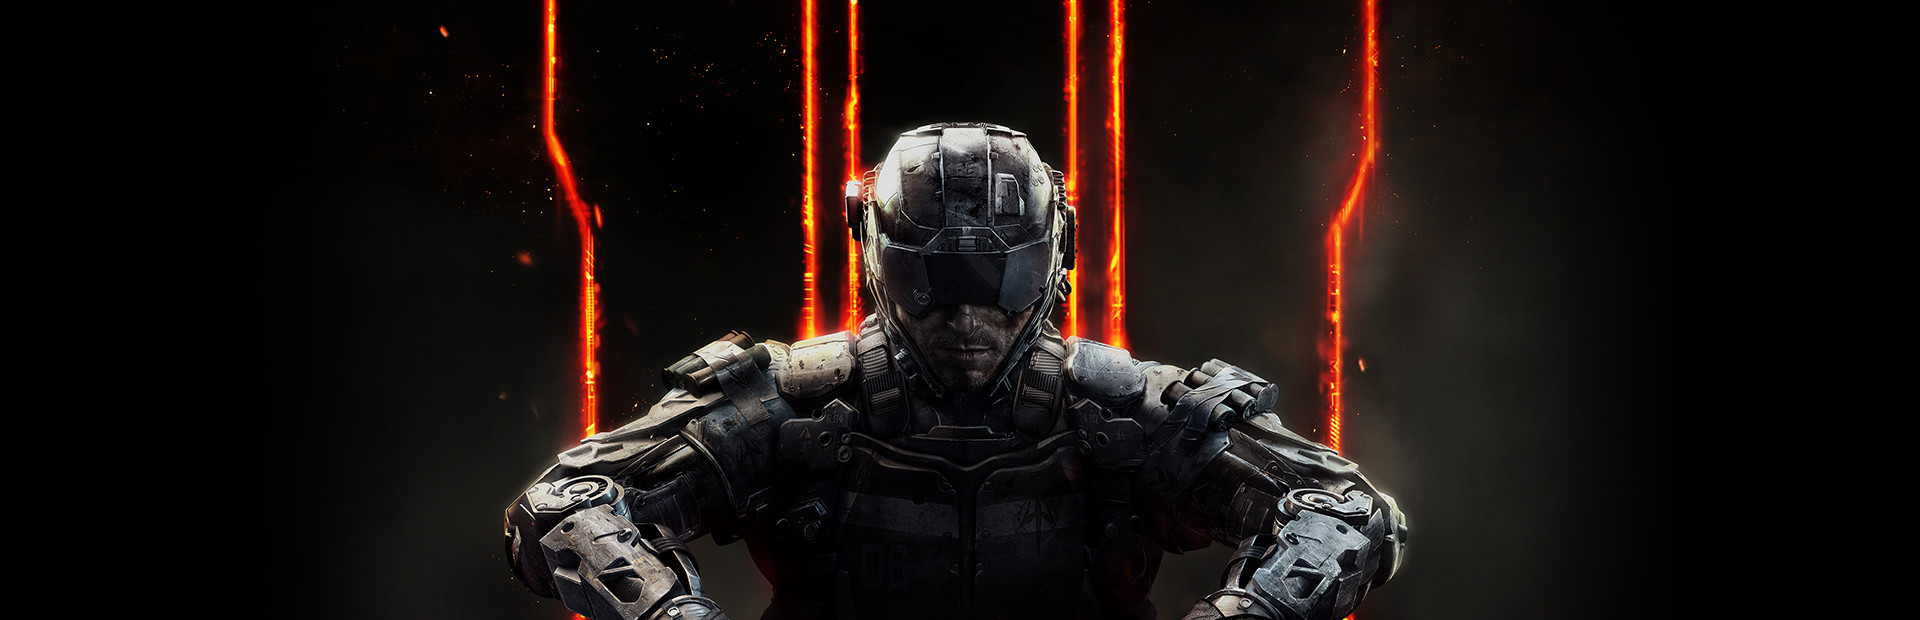 Call of Duty®: Black Ops III cover image